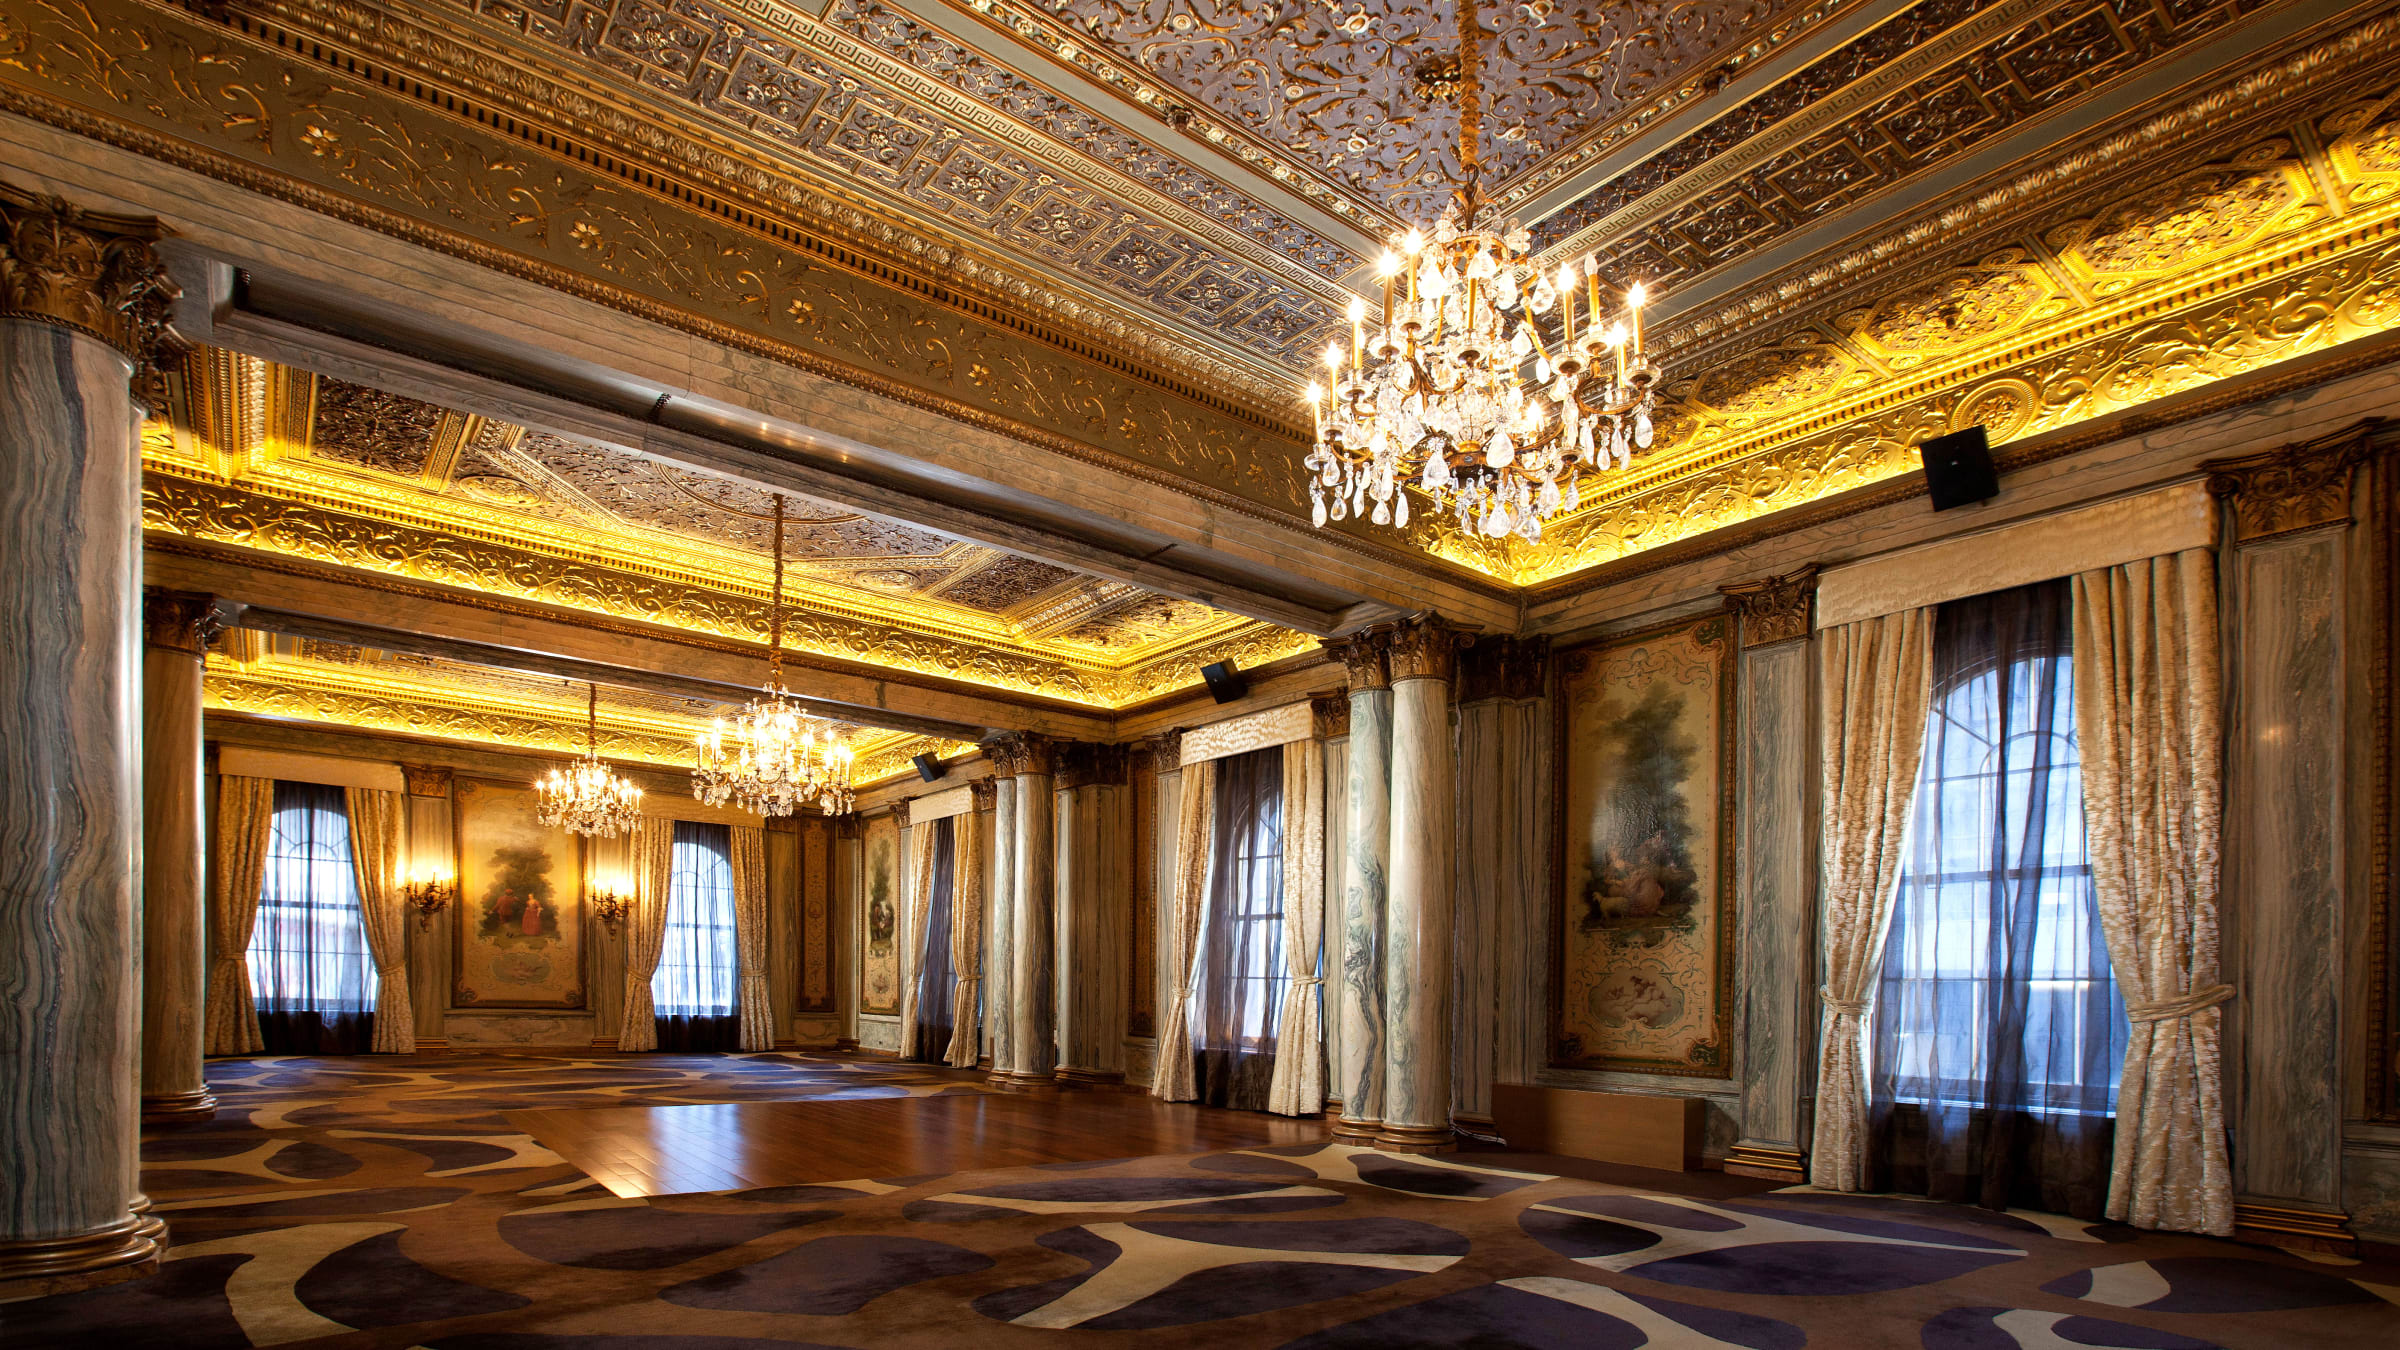 Villard House, the NYC Mansion of Doomed Railroad Tycoon, Now Open for Tours by Lotte New York Palace Hotel